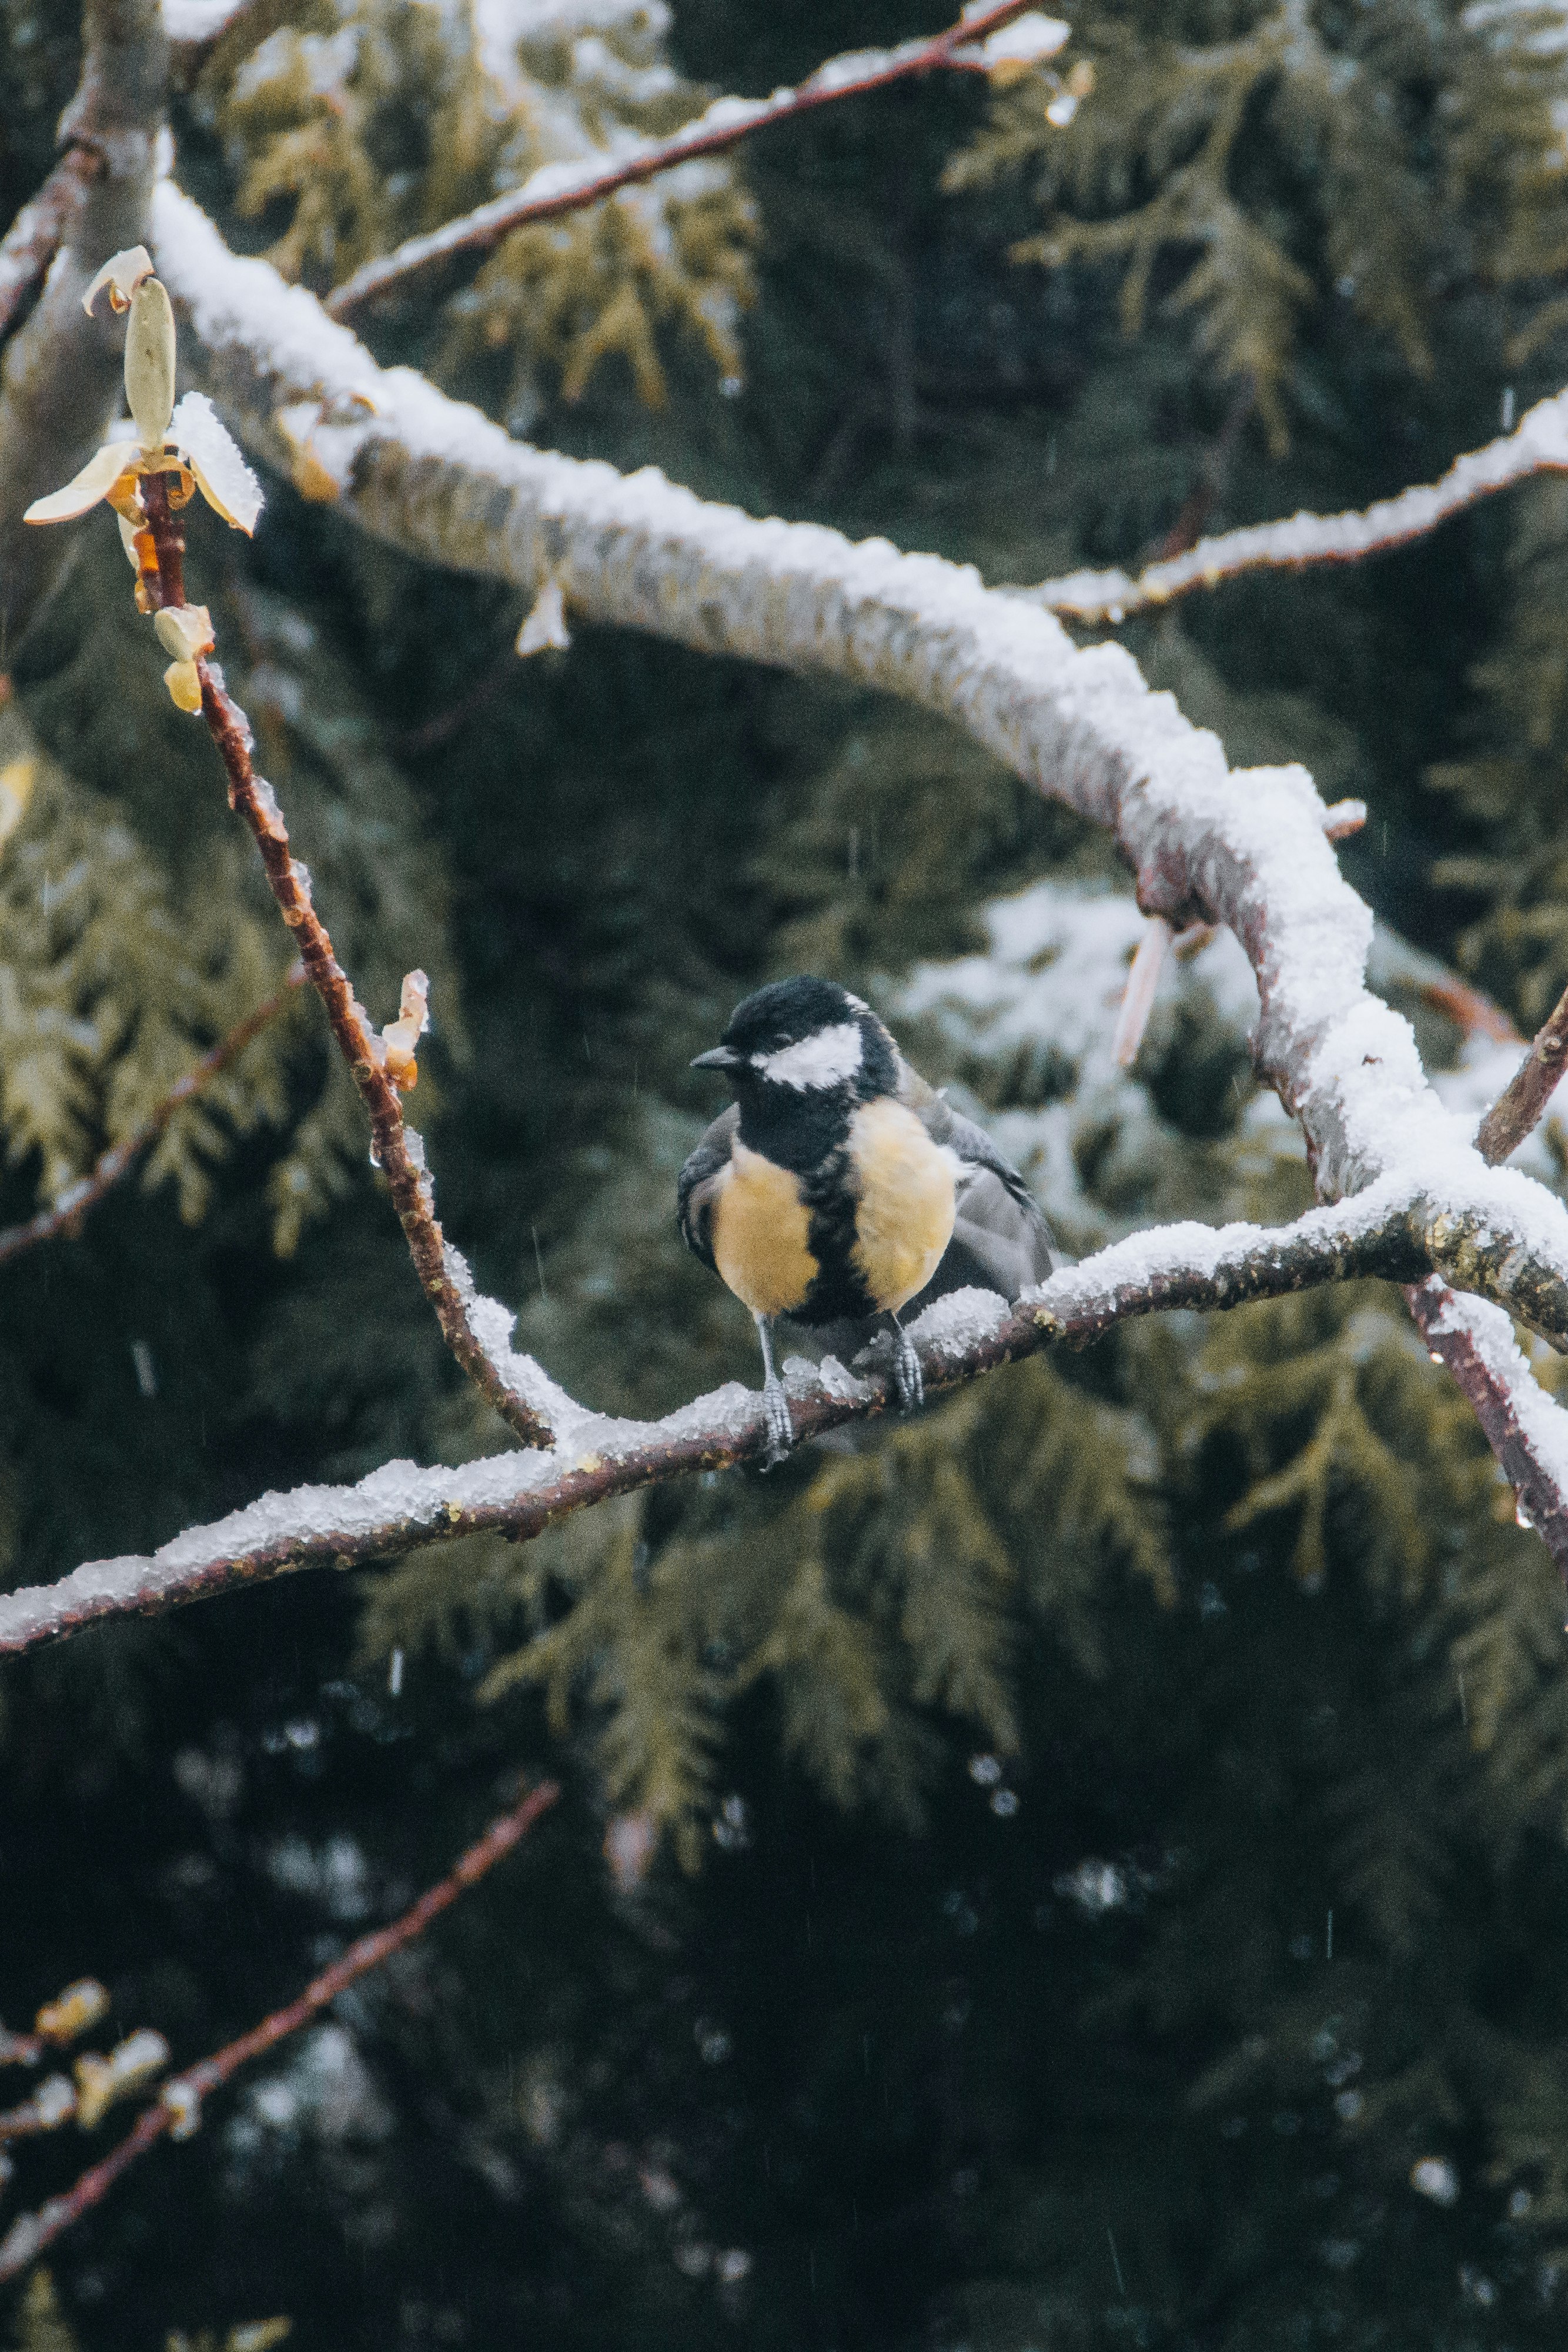 black and yellow bird on brown tree branch during daytime